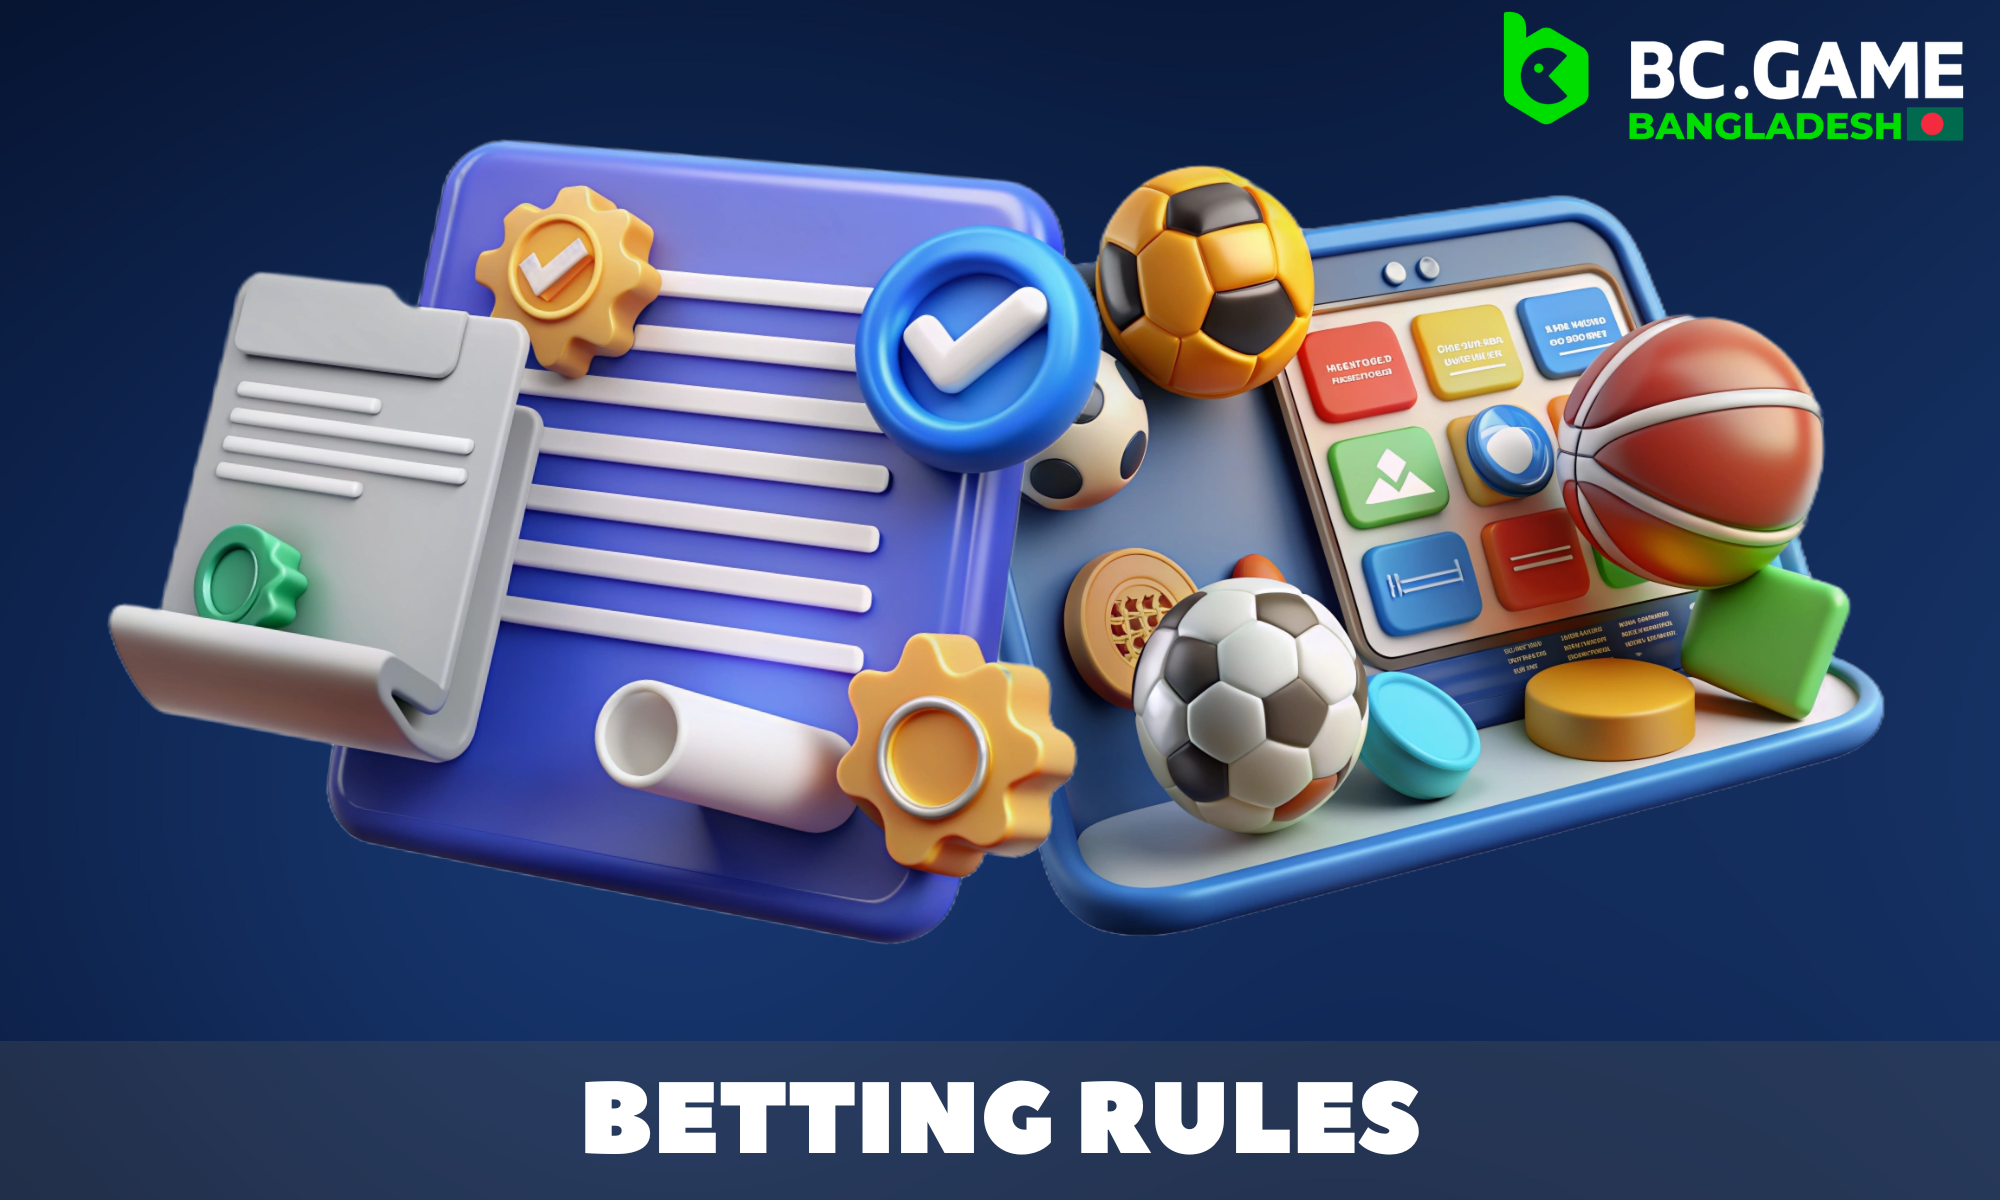 Basic rules for accepting bets on the BC.GAME website